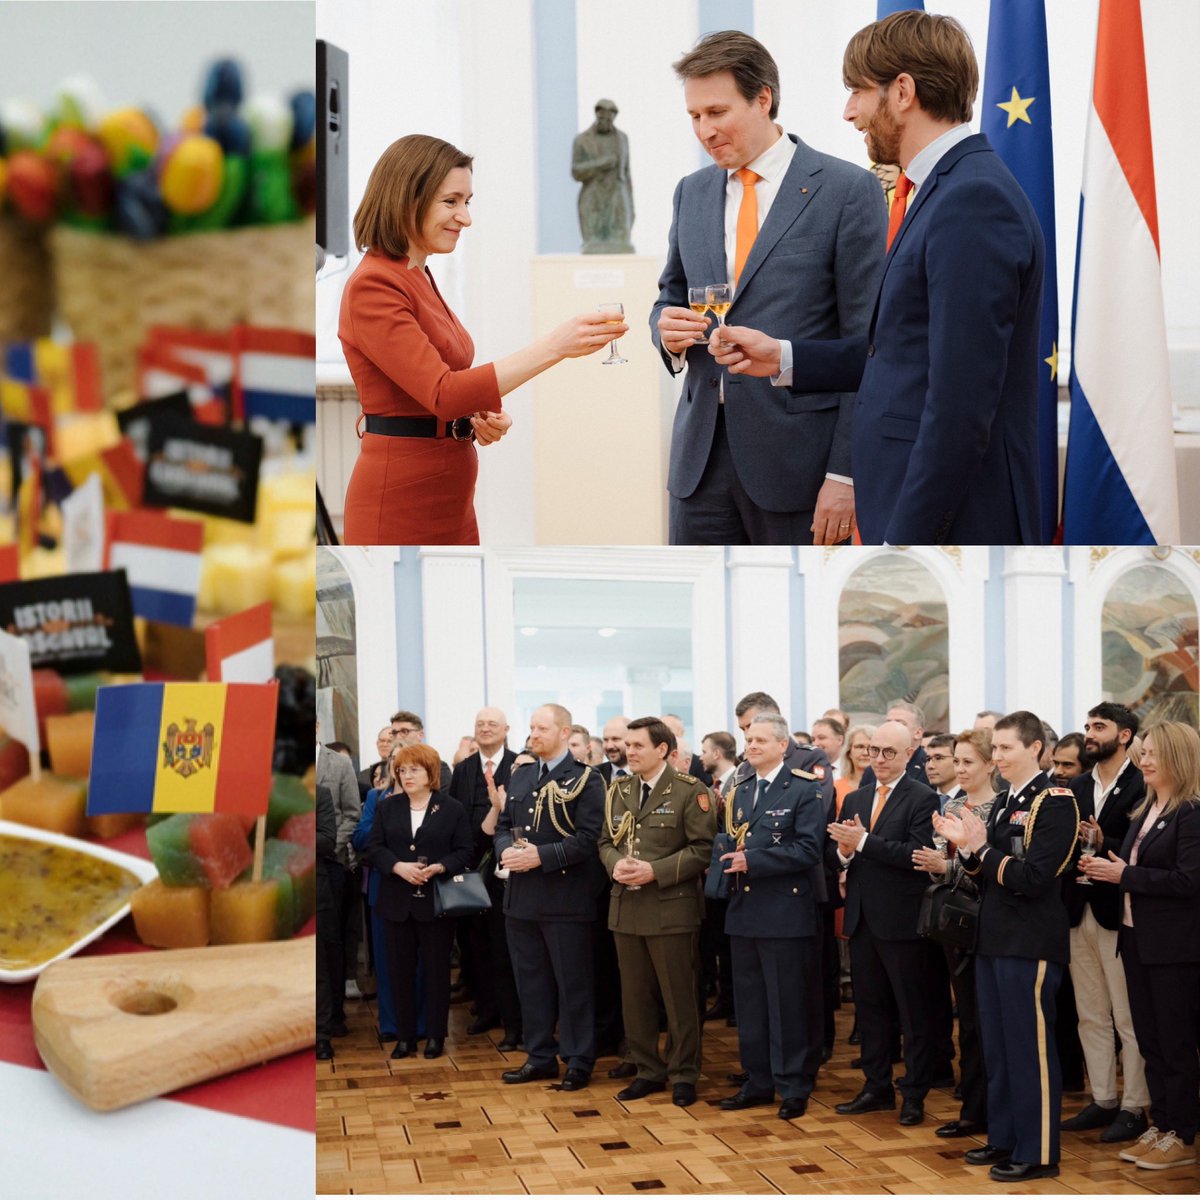 What a way to celebrate #Kingsday in Chisinău. Thank you President @sandumaiamd for your warm words and for sharing a toast with us on King Willem-Alexander!